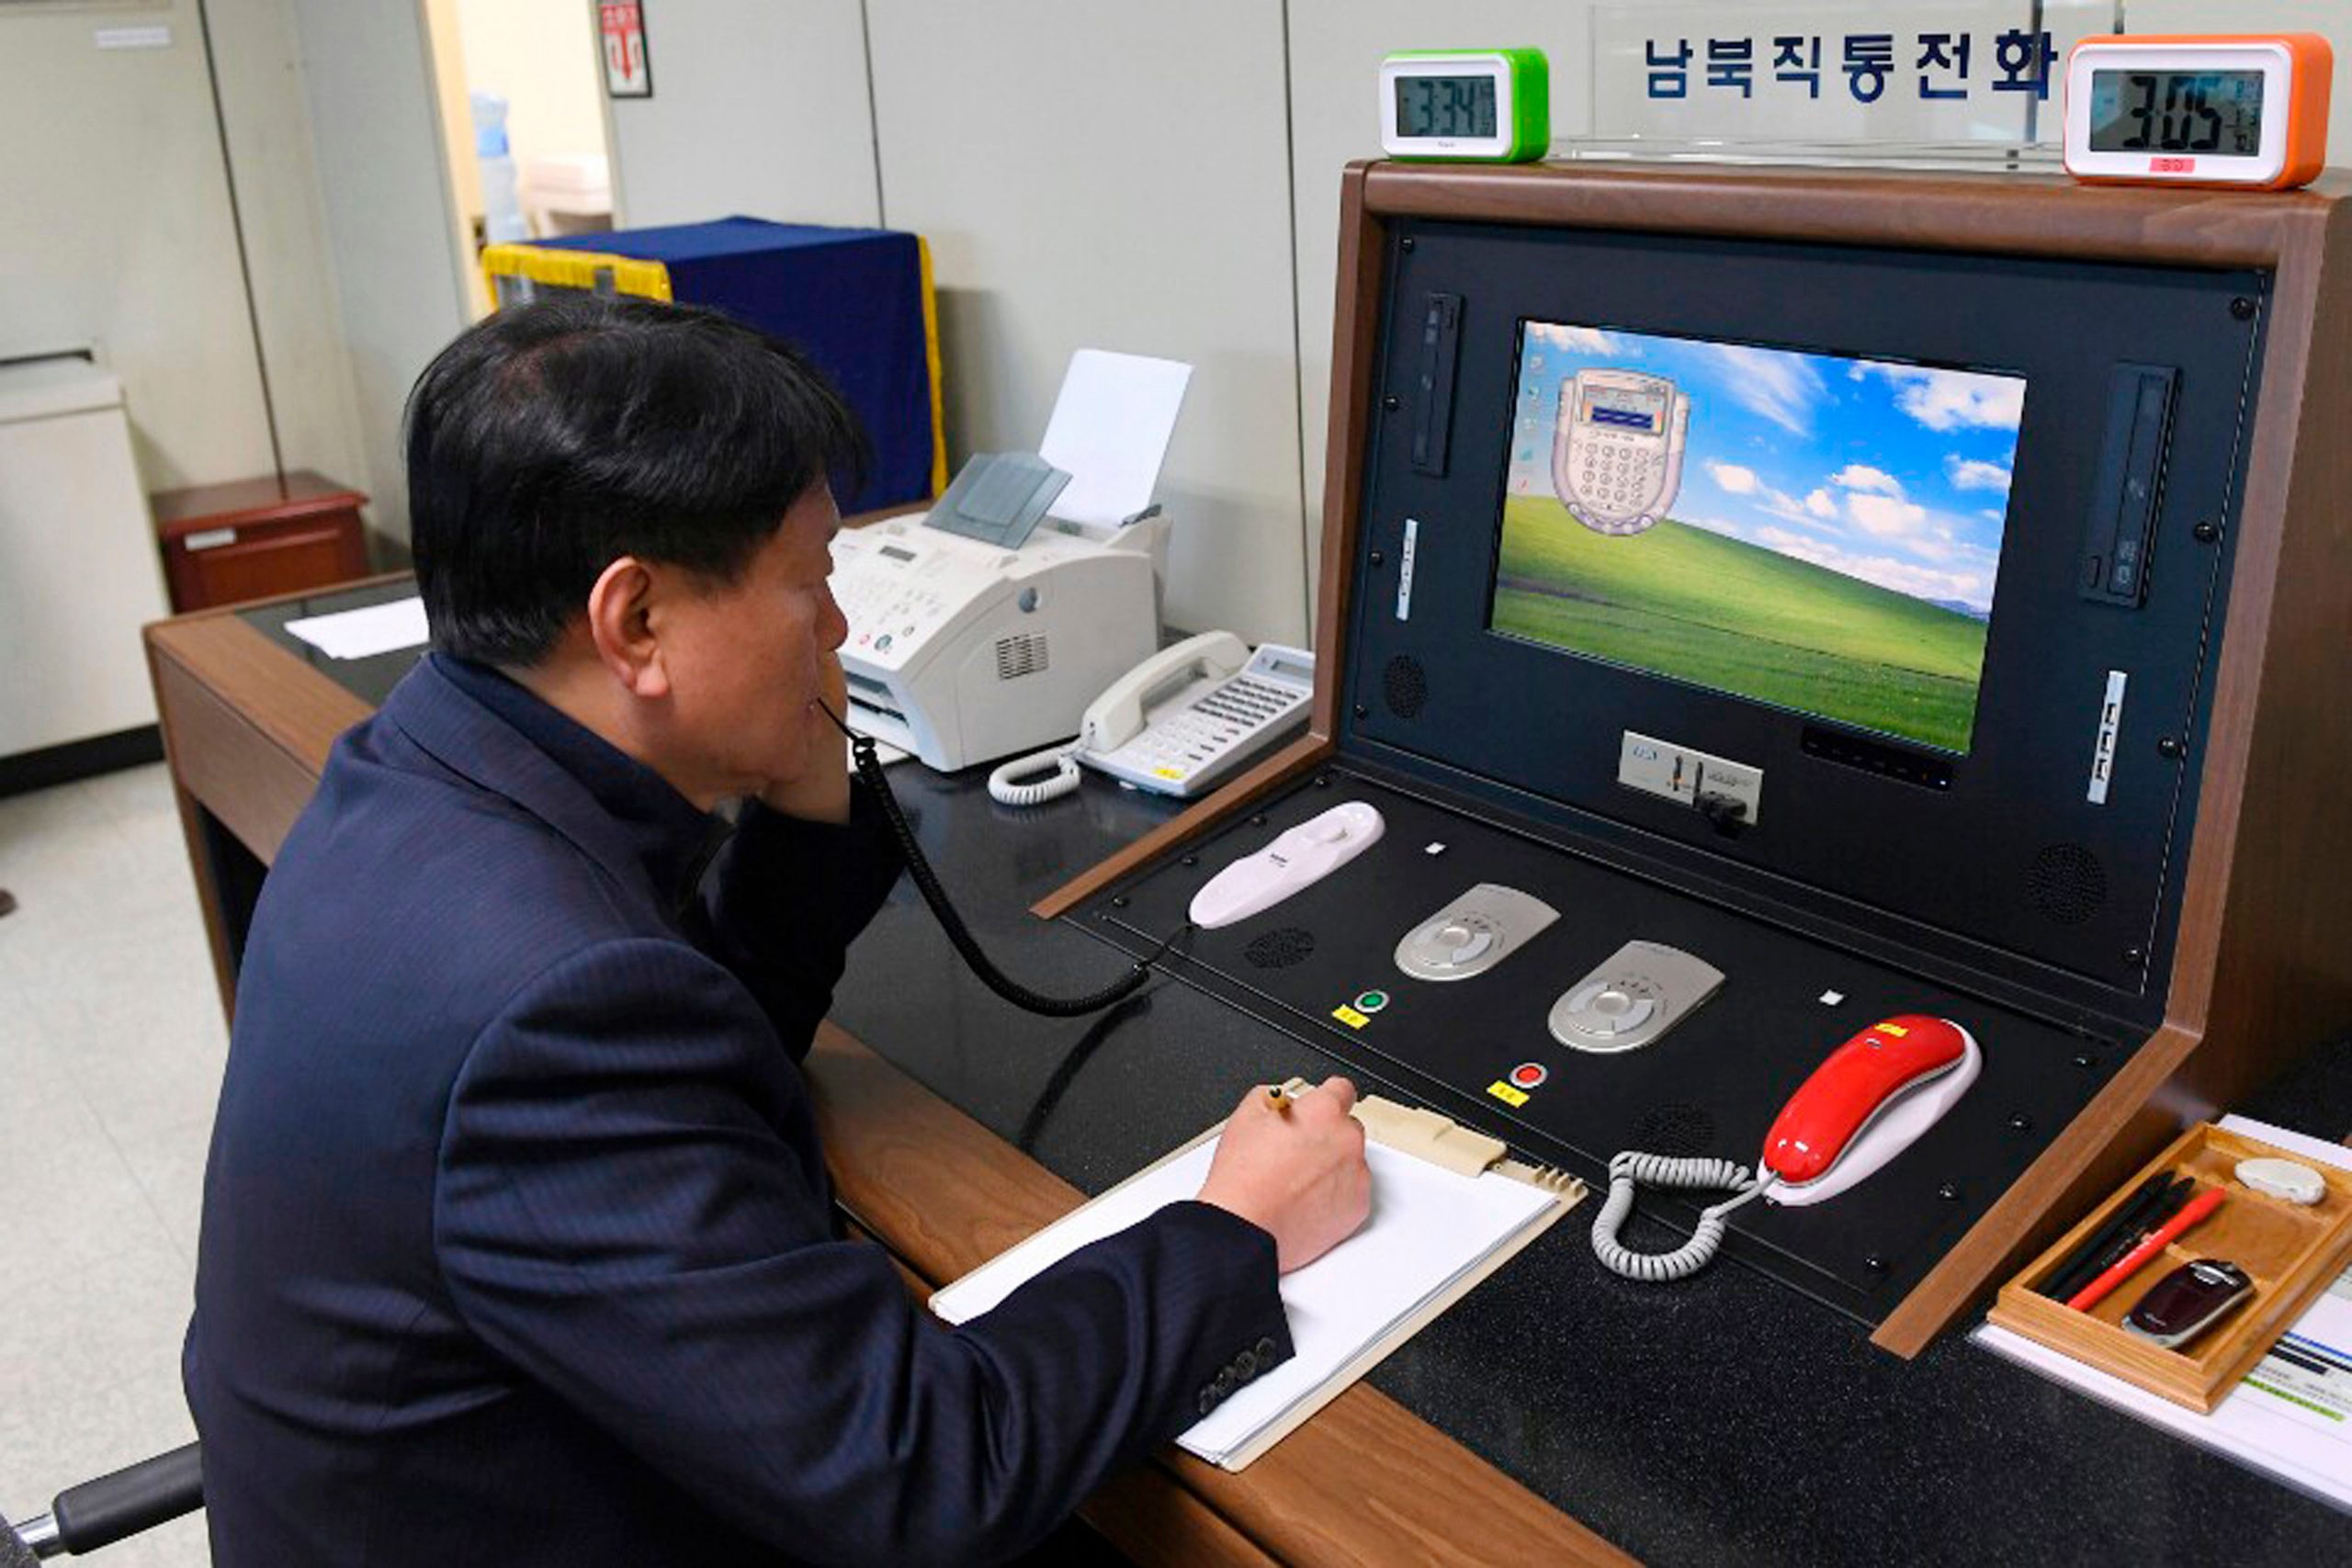 ‘Conditional’ olive branch: North Korea restores hotline with South Korea